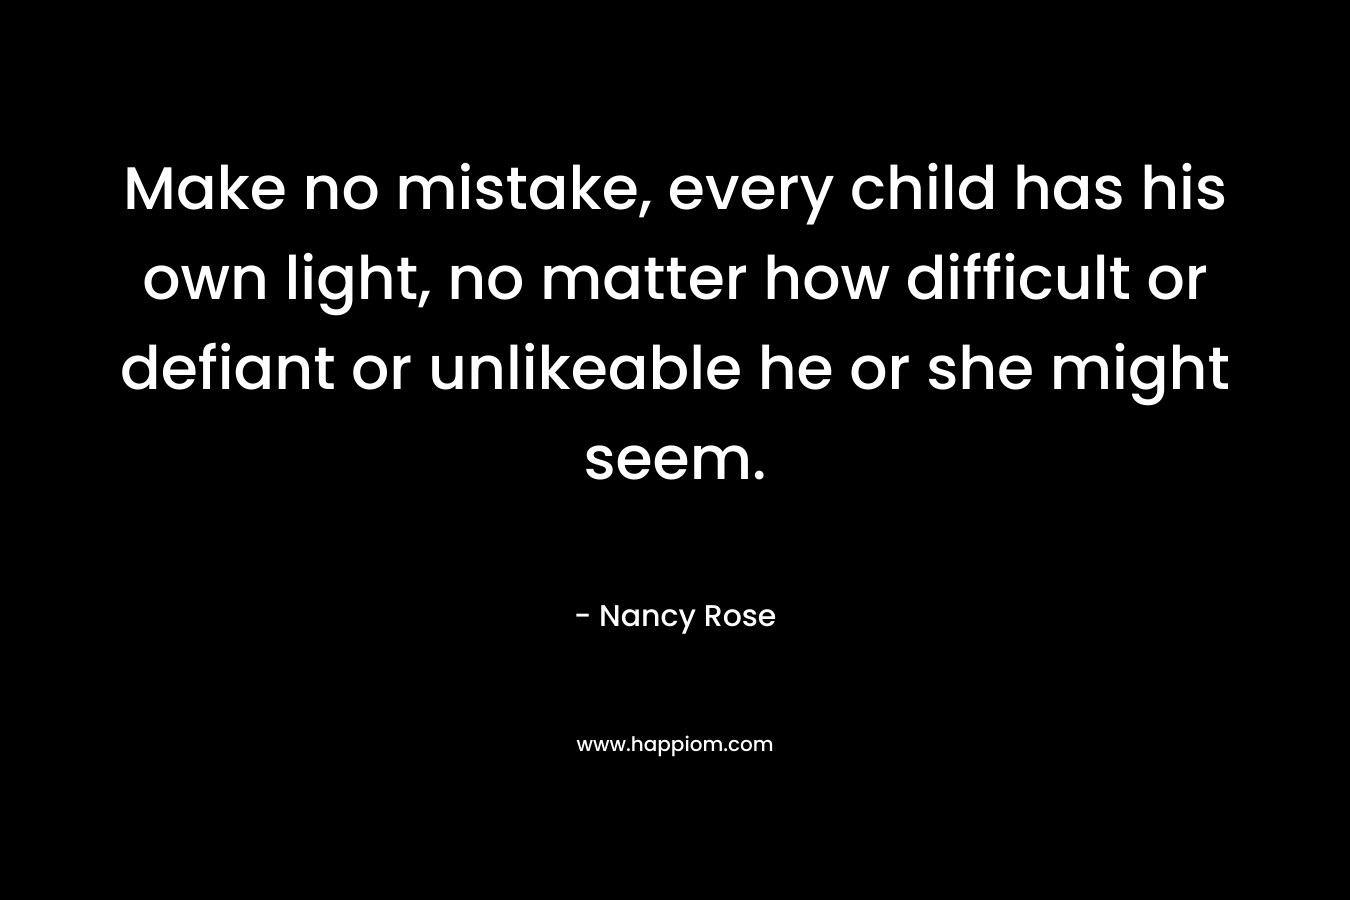 Make no mistake, every child has his own light, no matter how difficult or defiant or unlikeable he or she might seem.